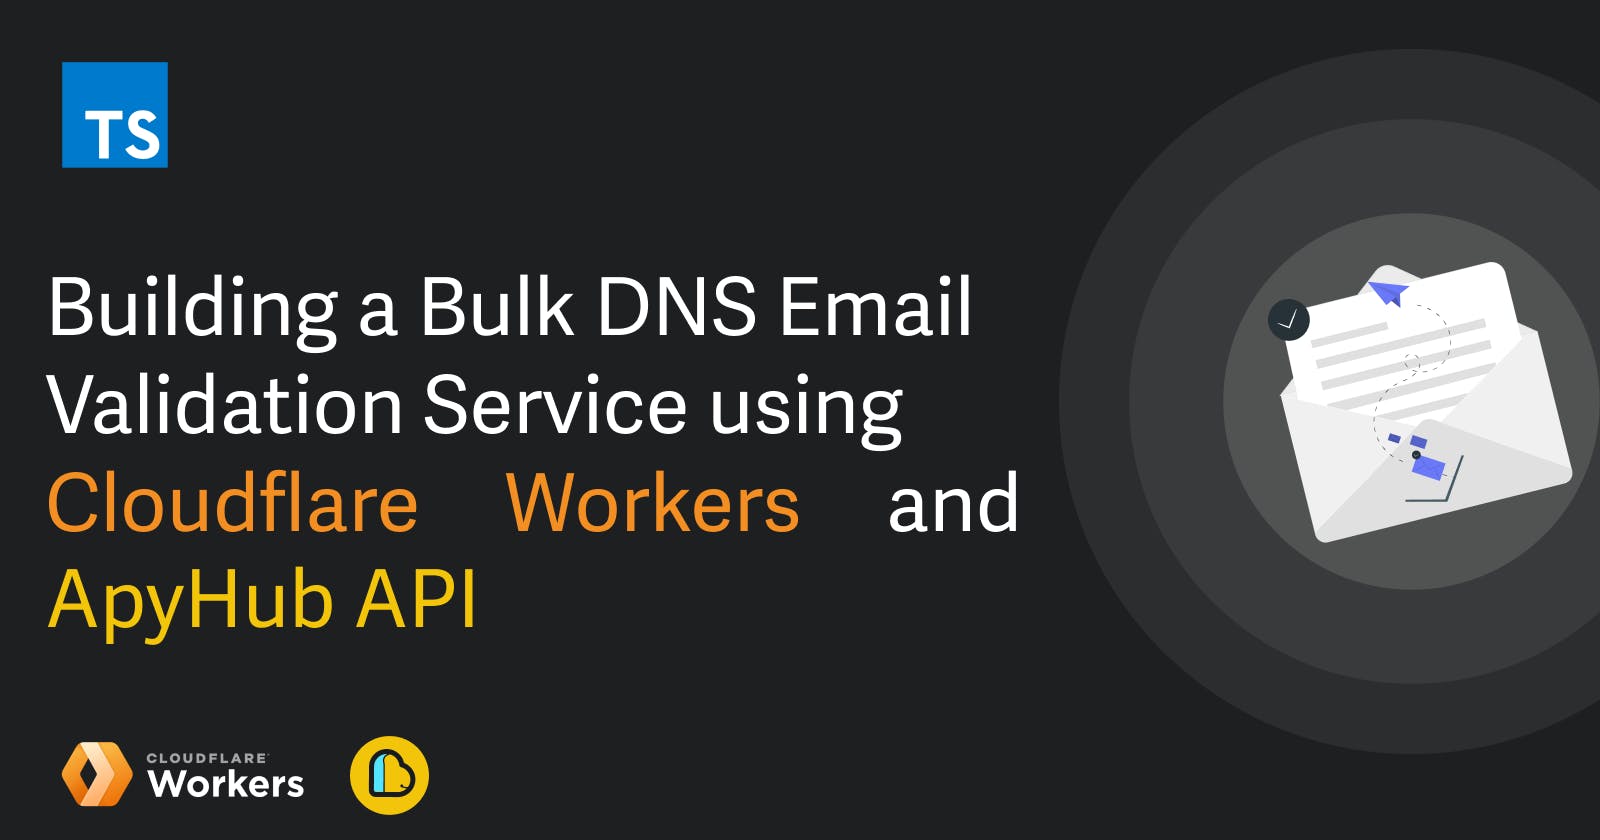 Building a Bulk DNS Email Validation Service using Cloudflare Workers and ApyHub API